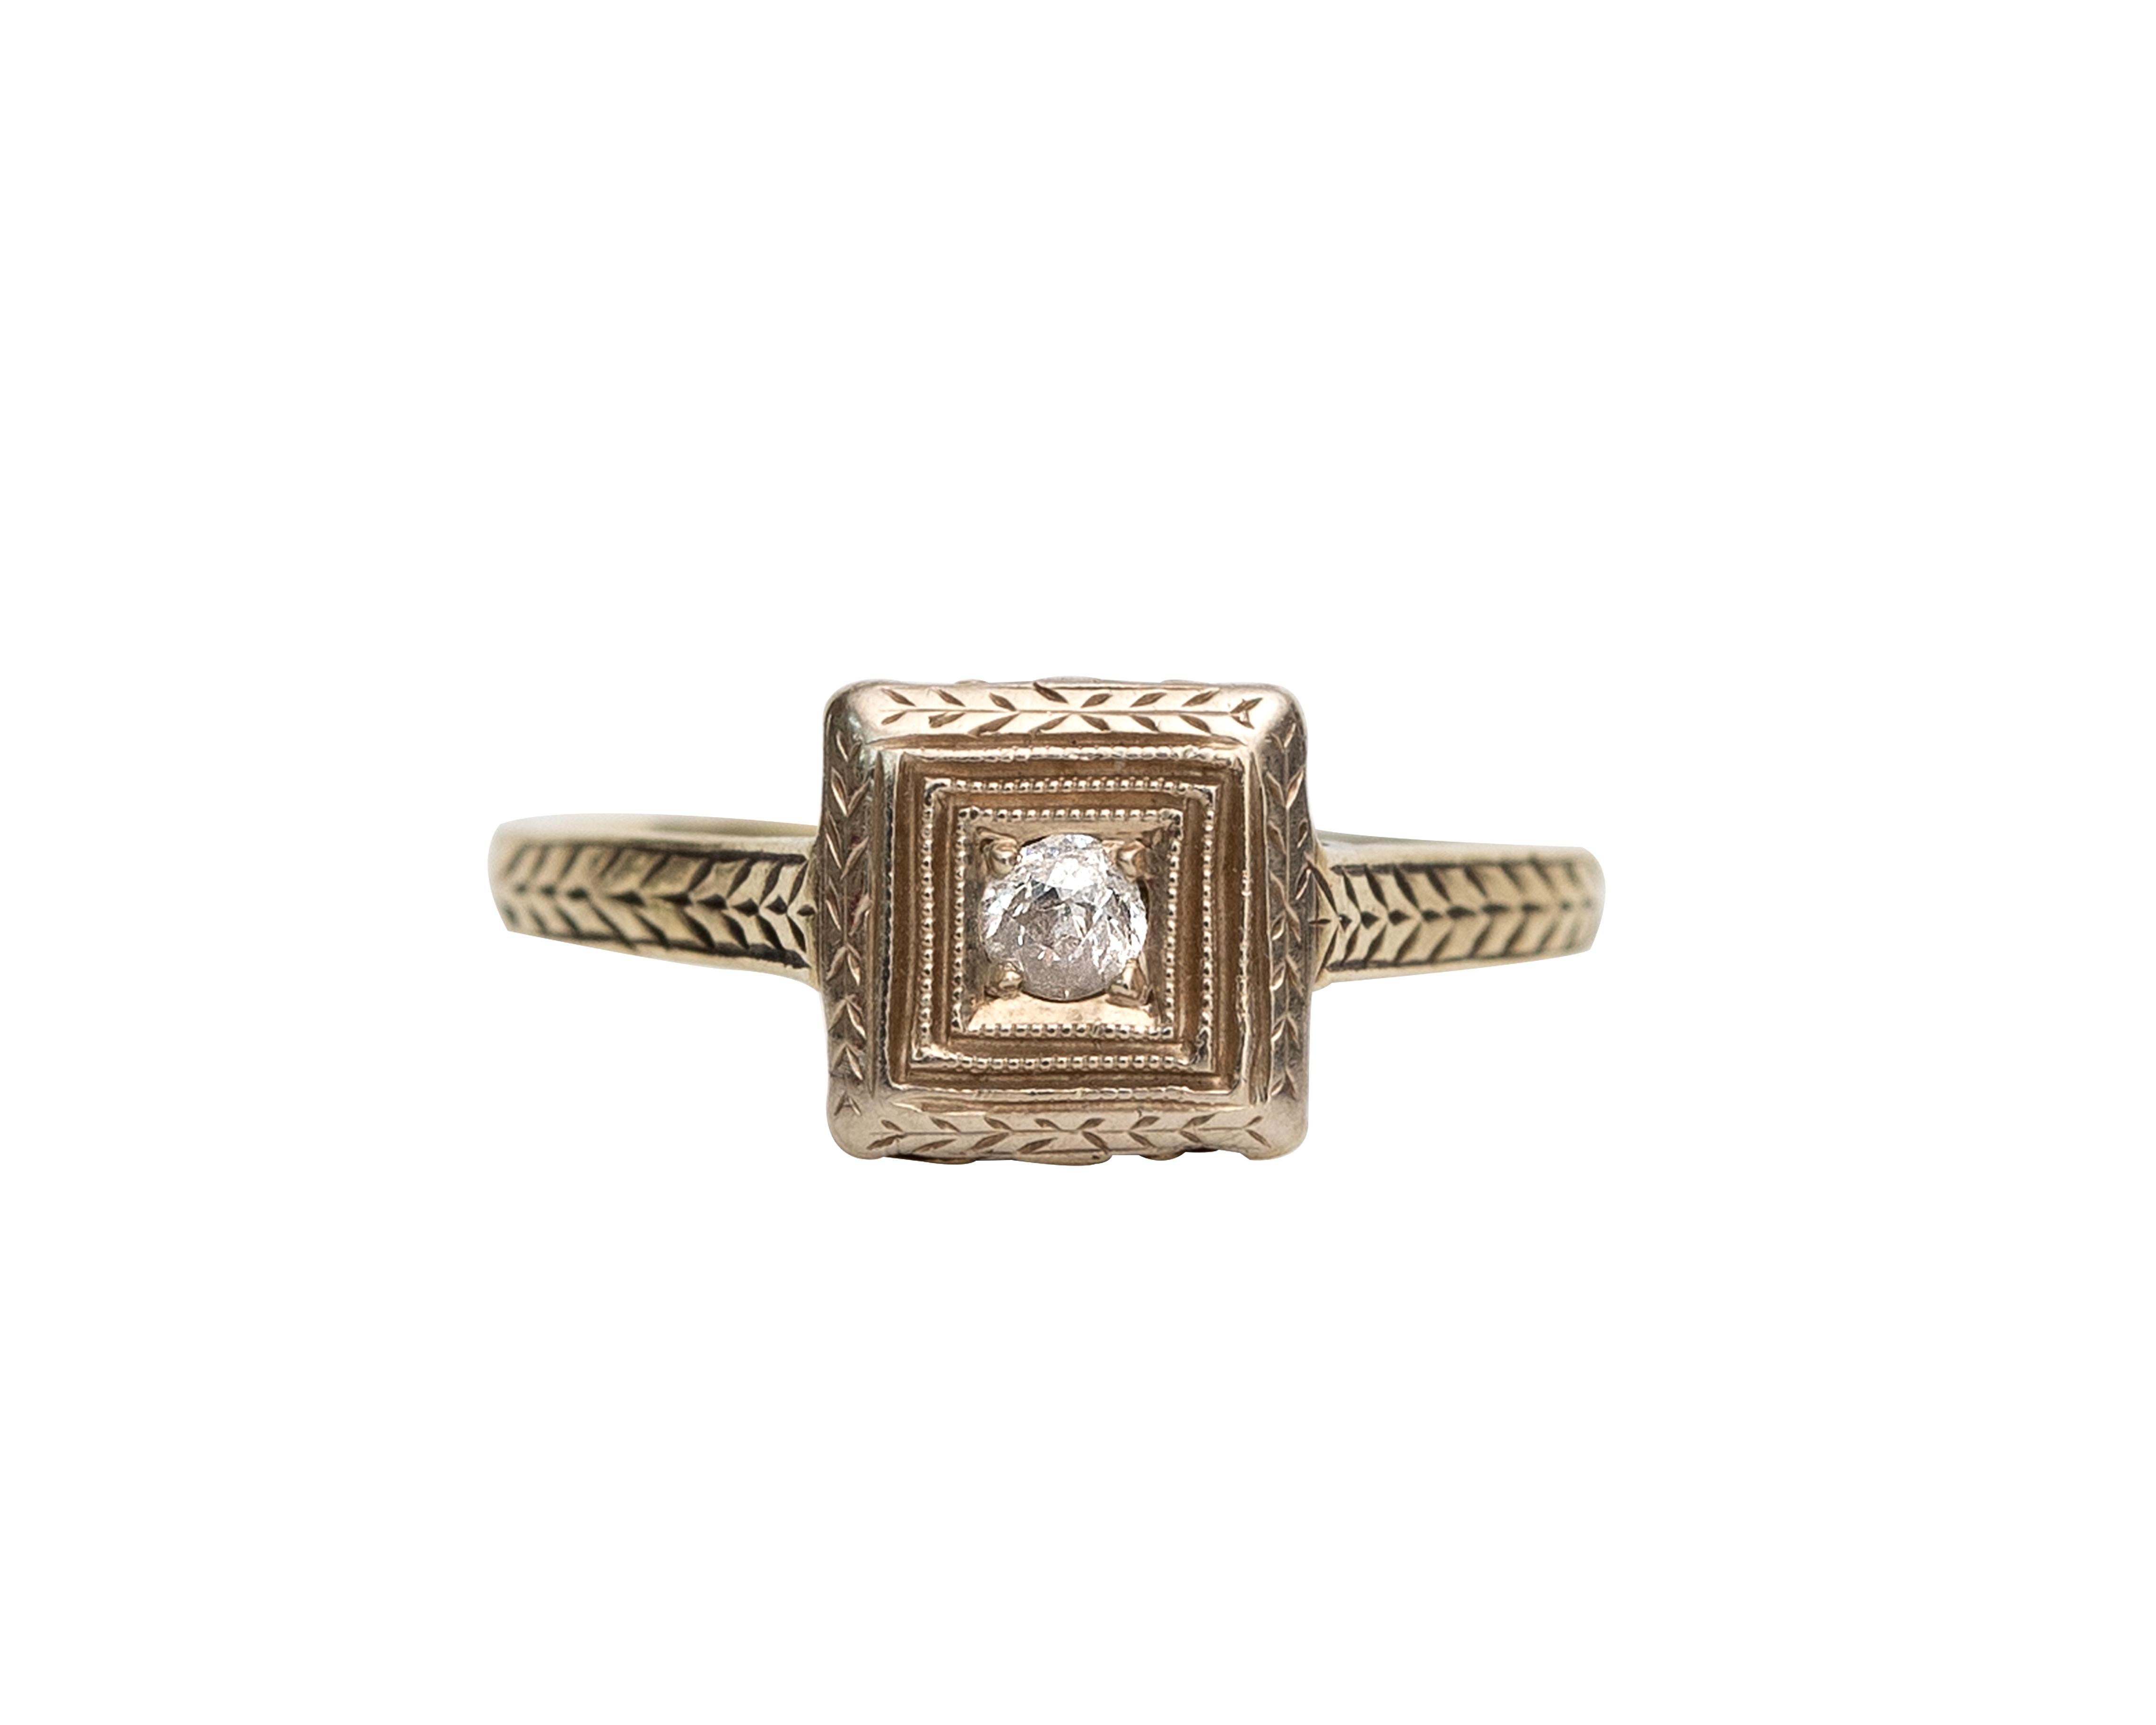 WOW! This Art Deco solitaire is simple elegance! Featuring a .03 carats old minor cut diamond in the center of a square white gold head. The ring has evenly spaced etch design throughout the band on the shoulder of the ring and halfway down the